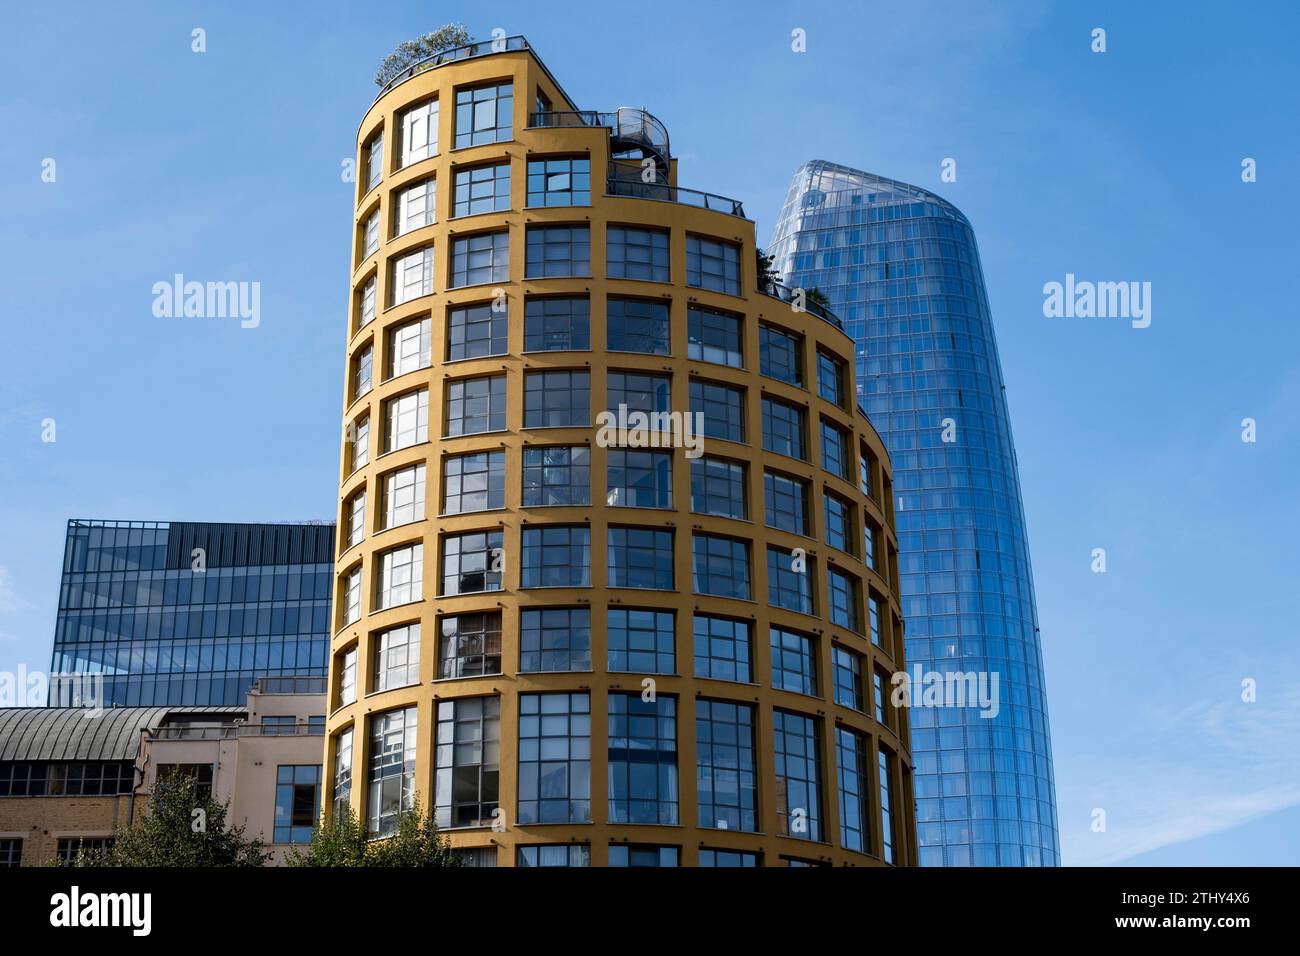 Bankside Lofts building on 17th October 2023 in London, United Kingdom. Bankside Lofts is an architecturally iconic residential apartment building on the South Bank containing loft apartments, which was built in the early 1990s. Stock Photo